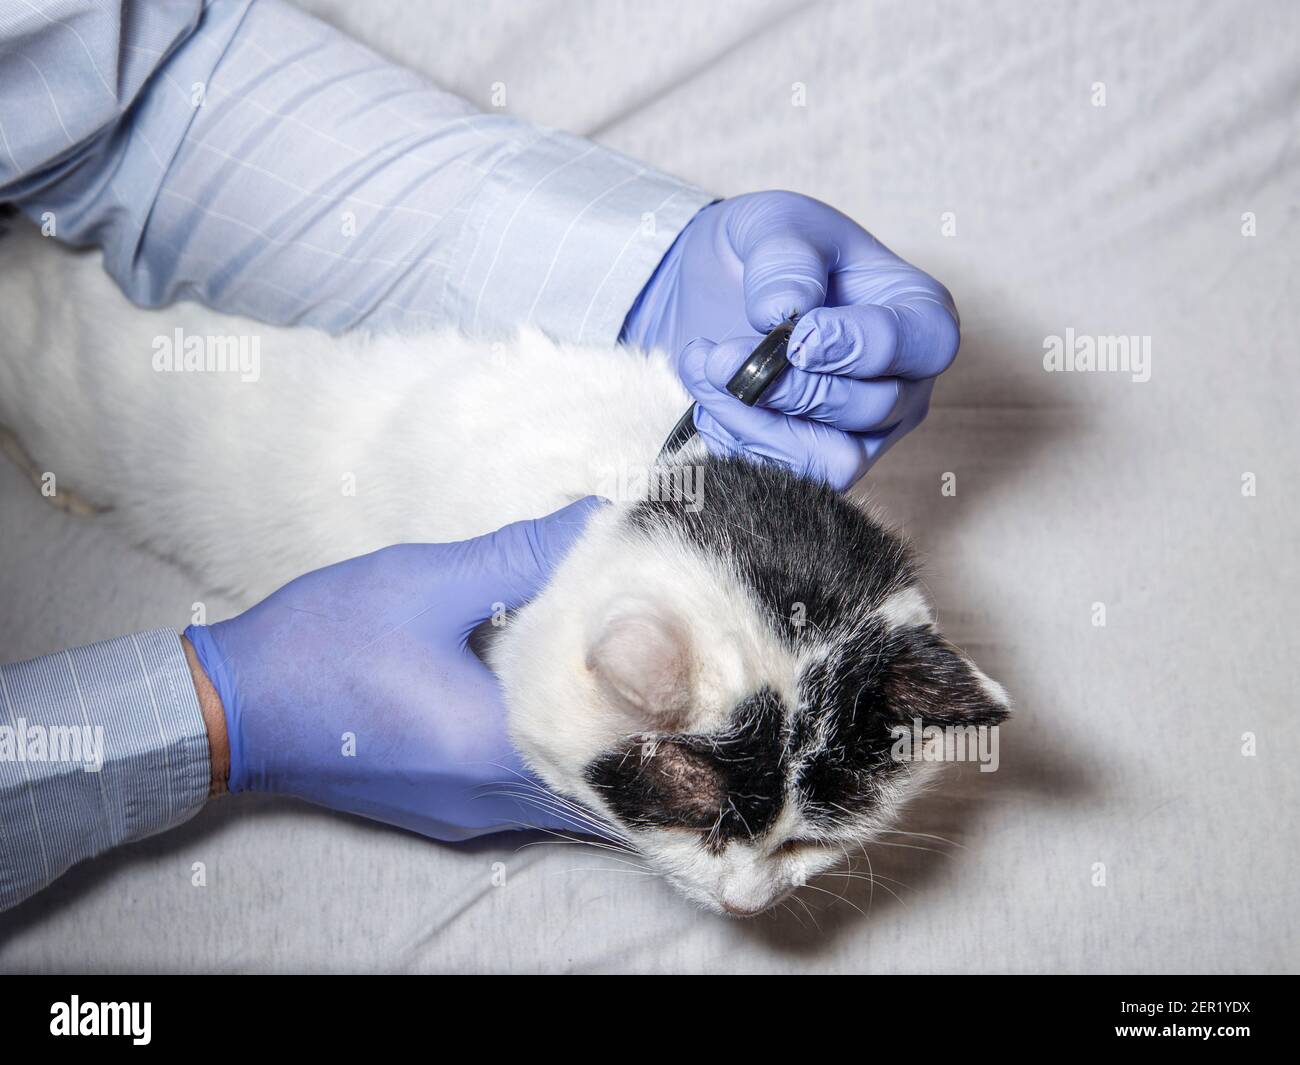 Cat collar is put on by veterinarian on white with black spots cat. Stock Photo